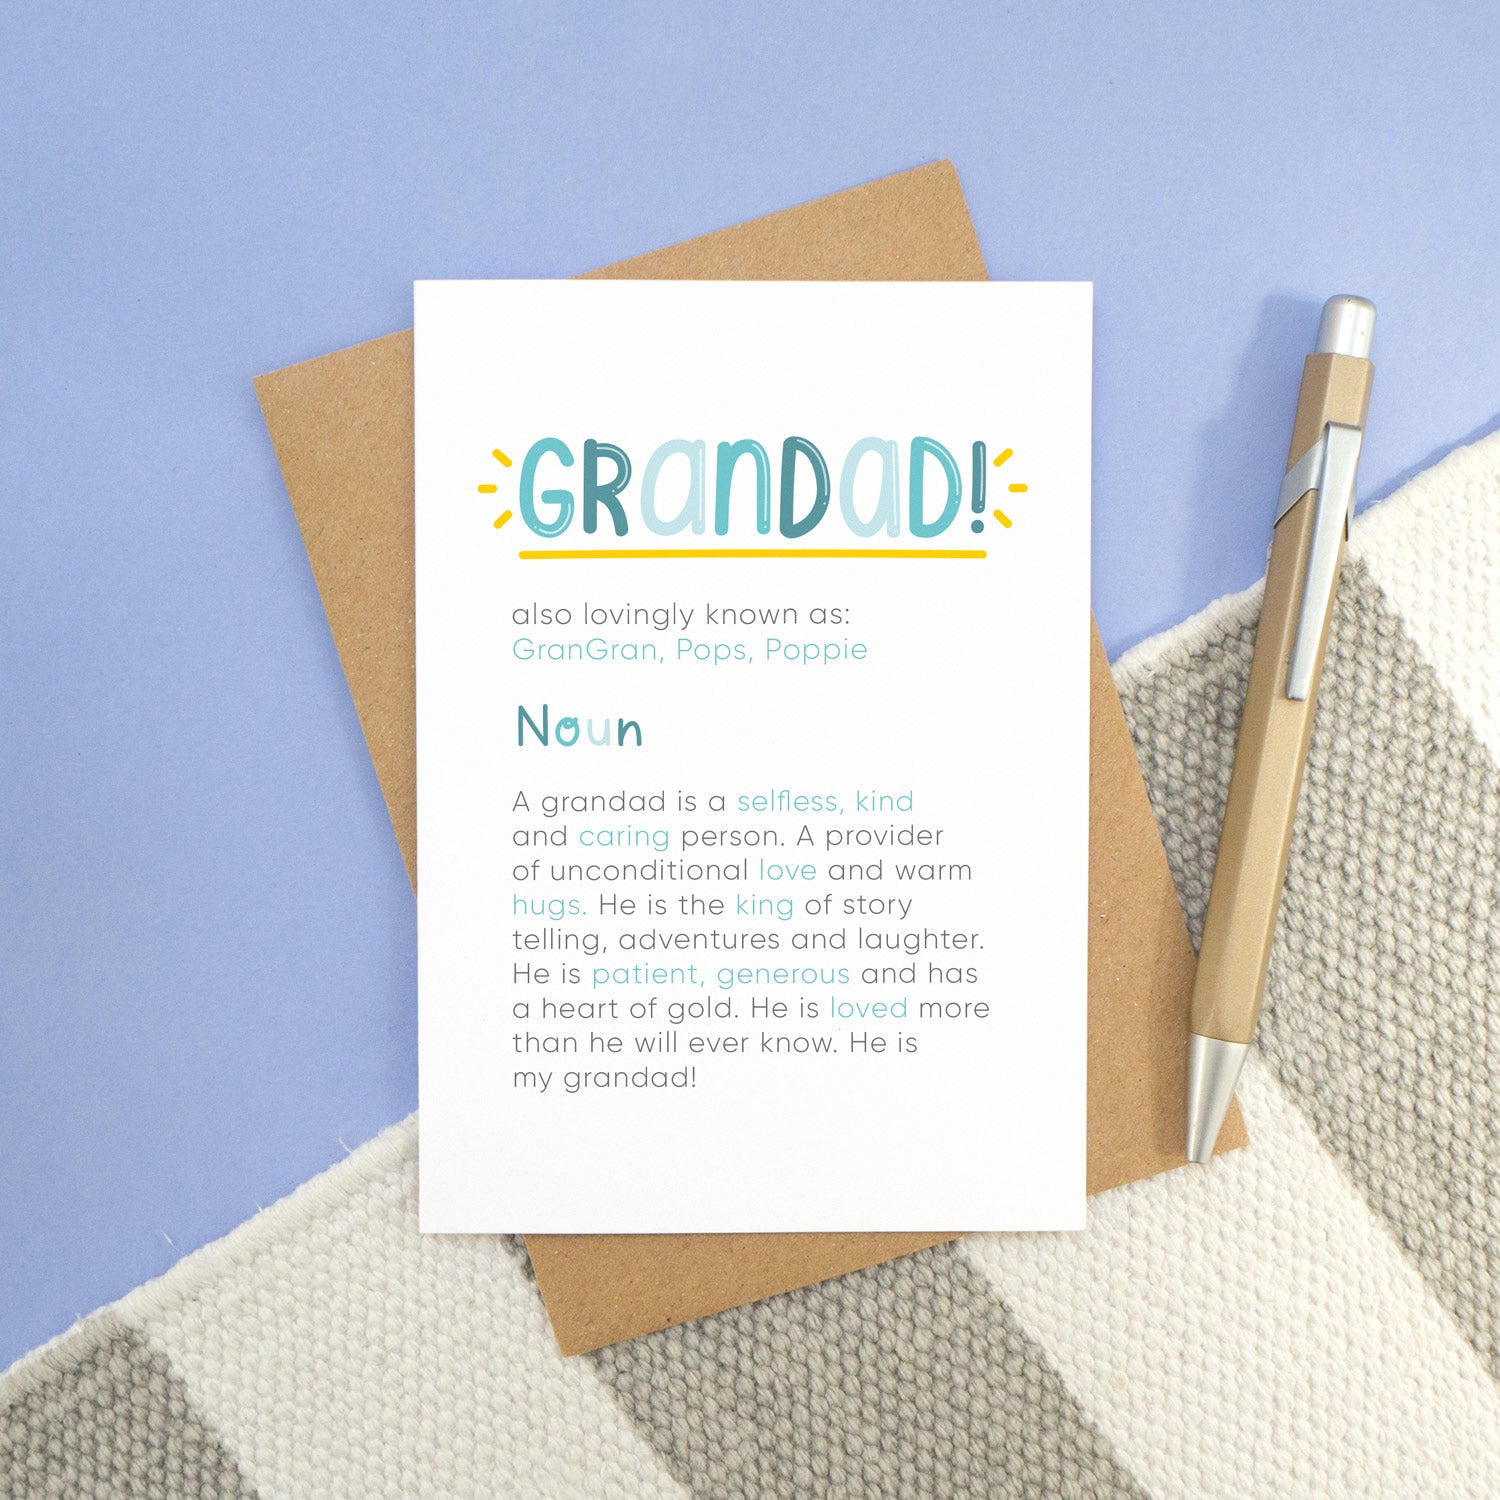 A grandad definition card laying on a stripy carpet and a blue background. The card shows grandad in bold lettering with the personalised nicknames underneath, followed by the definition.